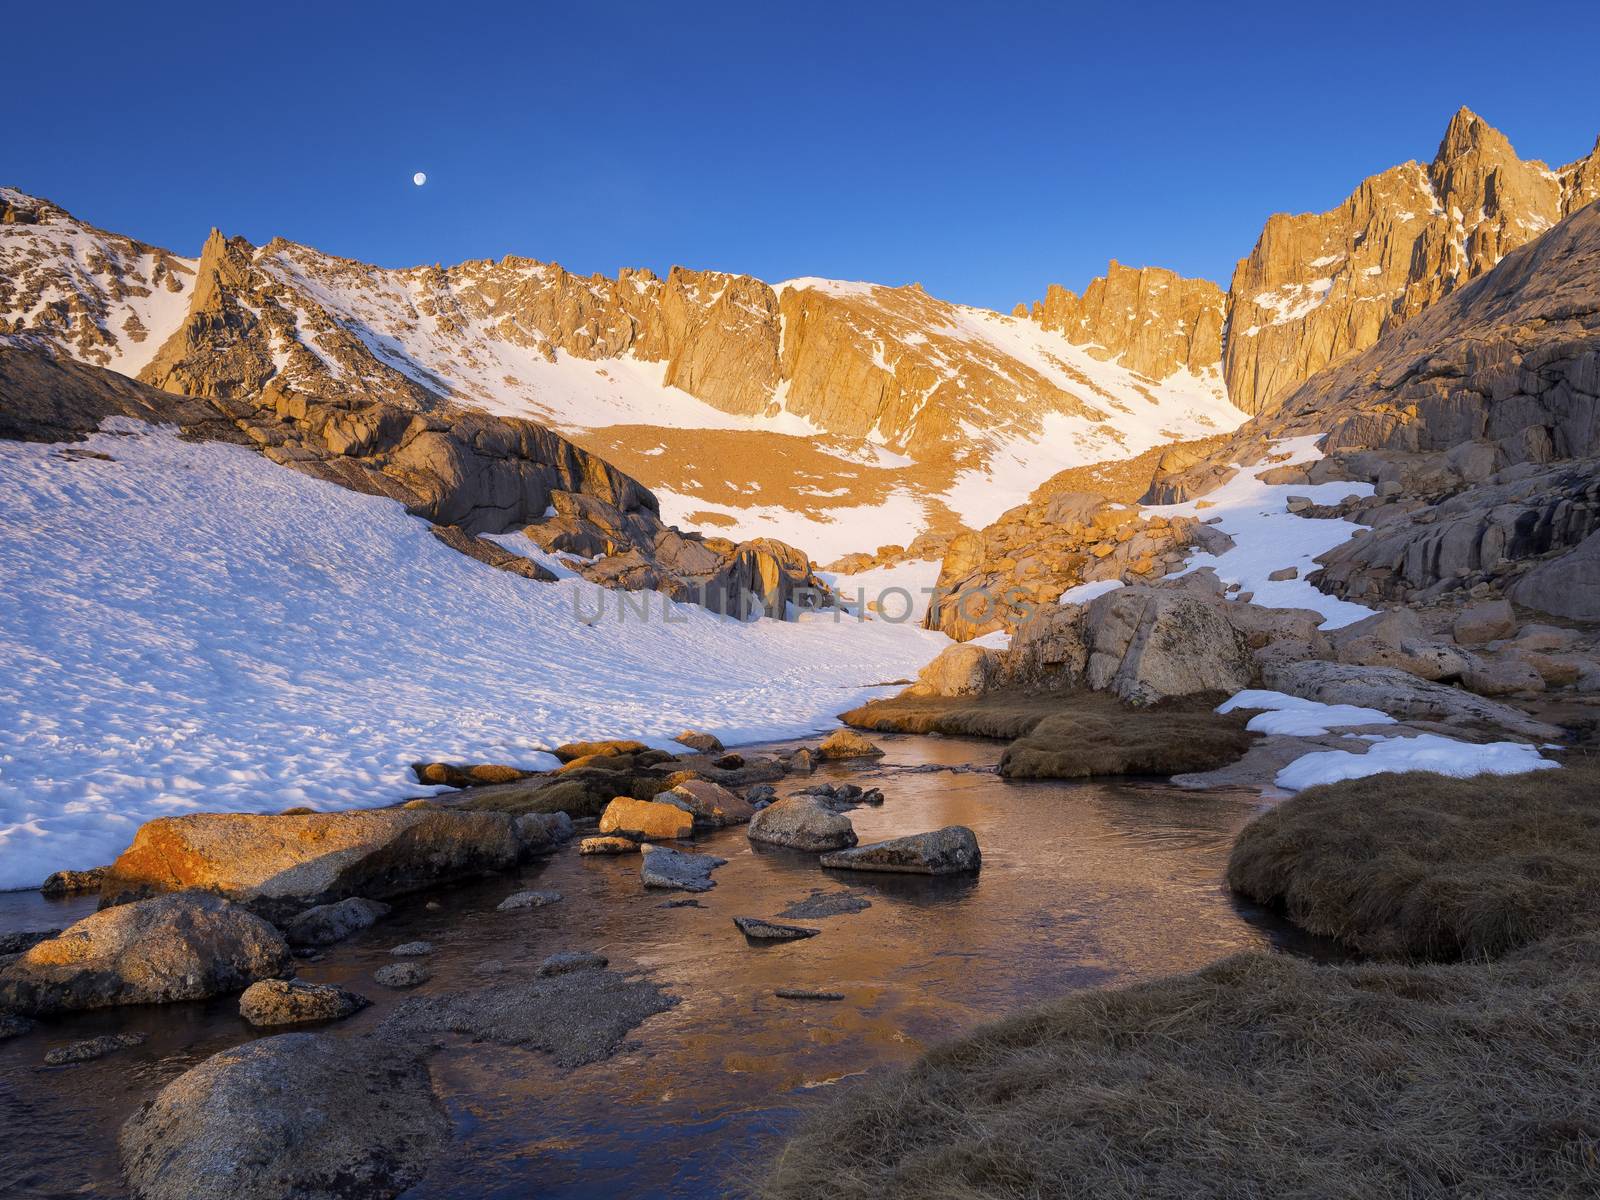 Mt. Whitney High Camp - Morning View by leieng